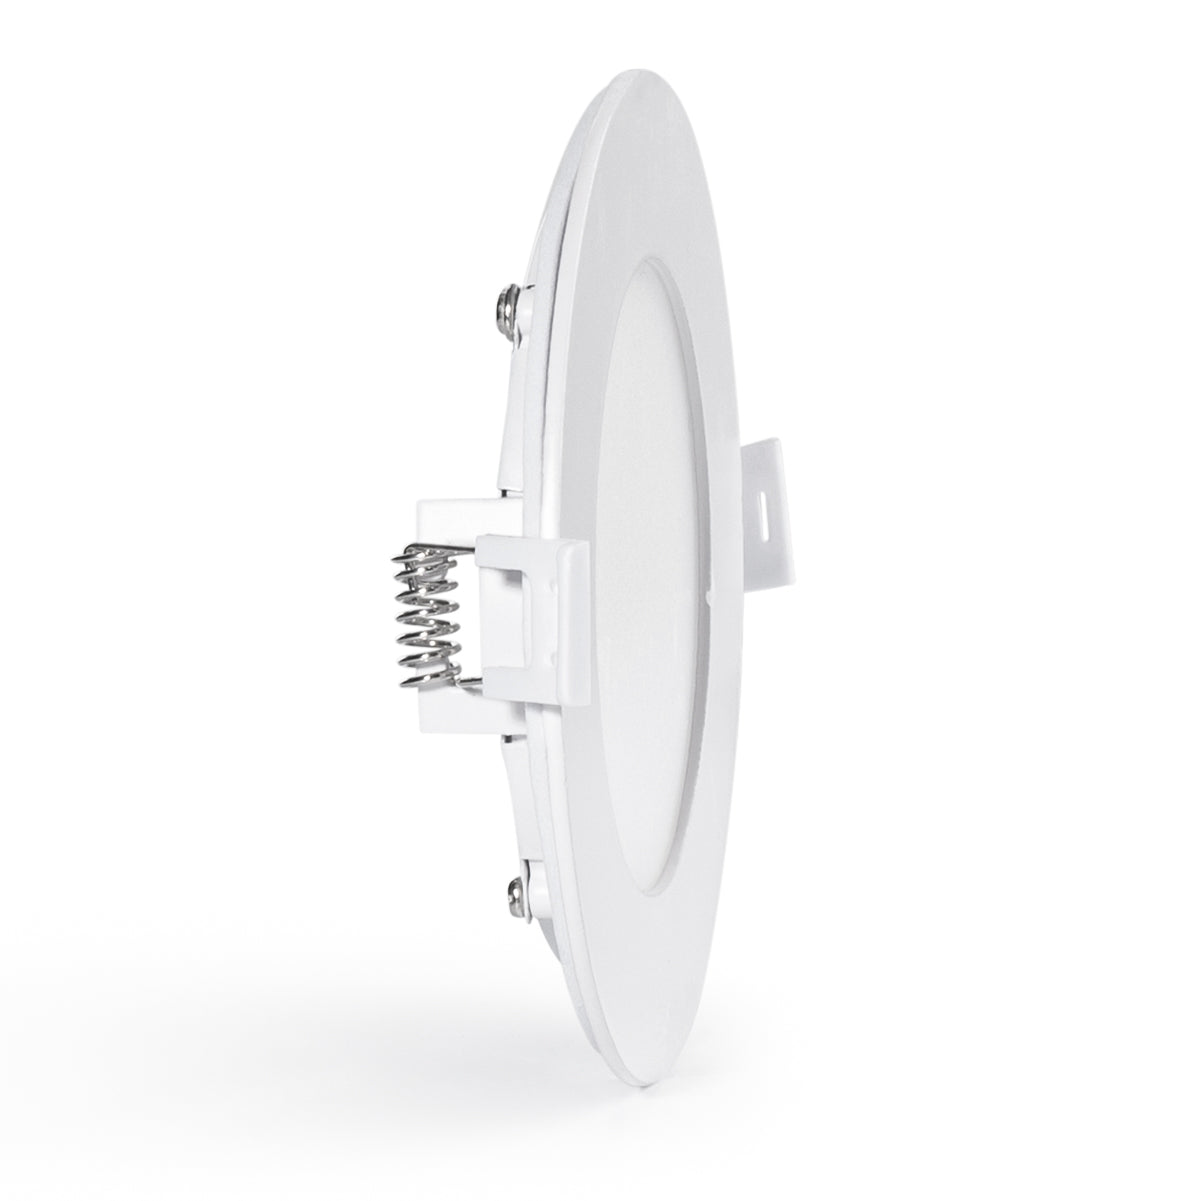 DirectLED 4 INCH LED ROUND RETROFIT - RECESSED LIGHT